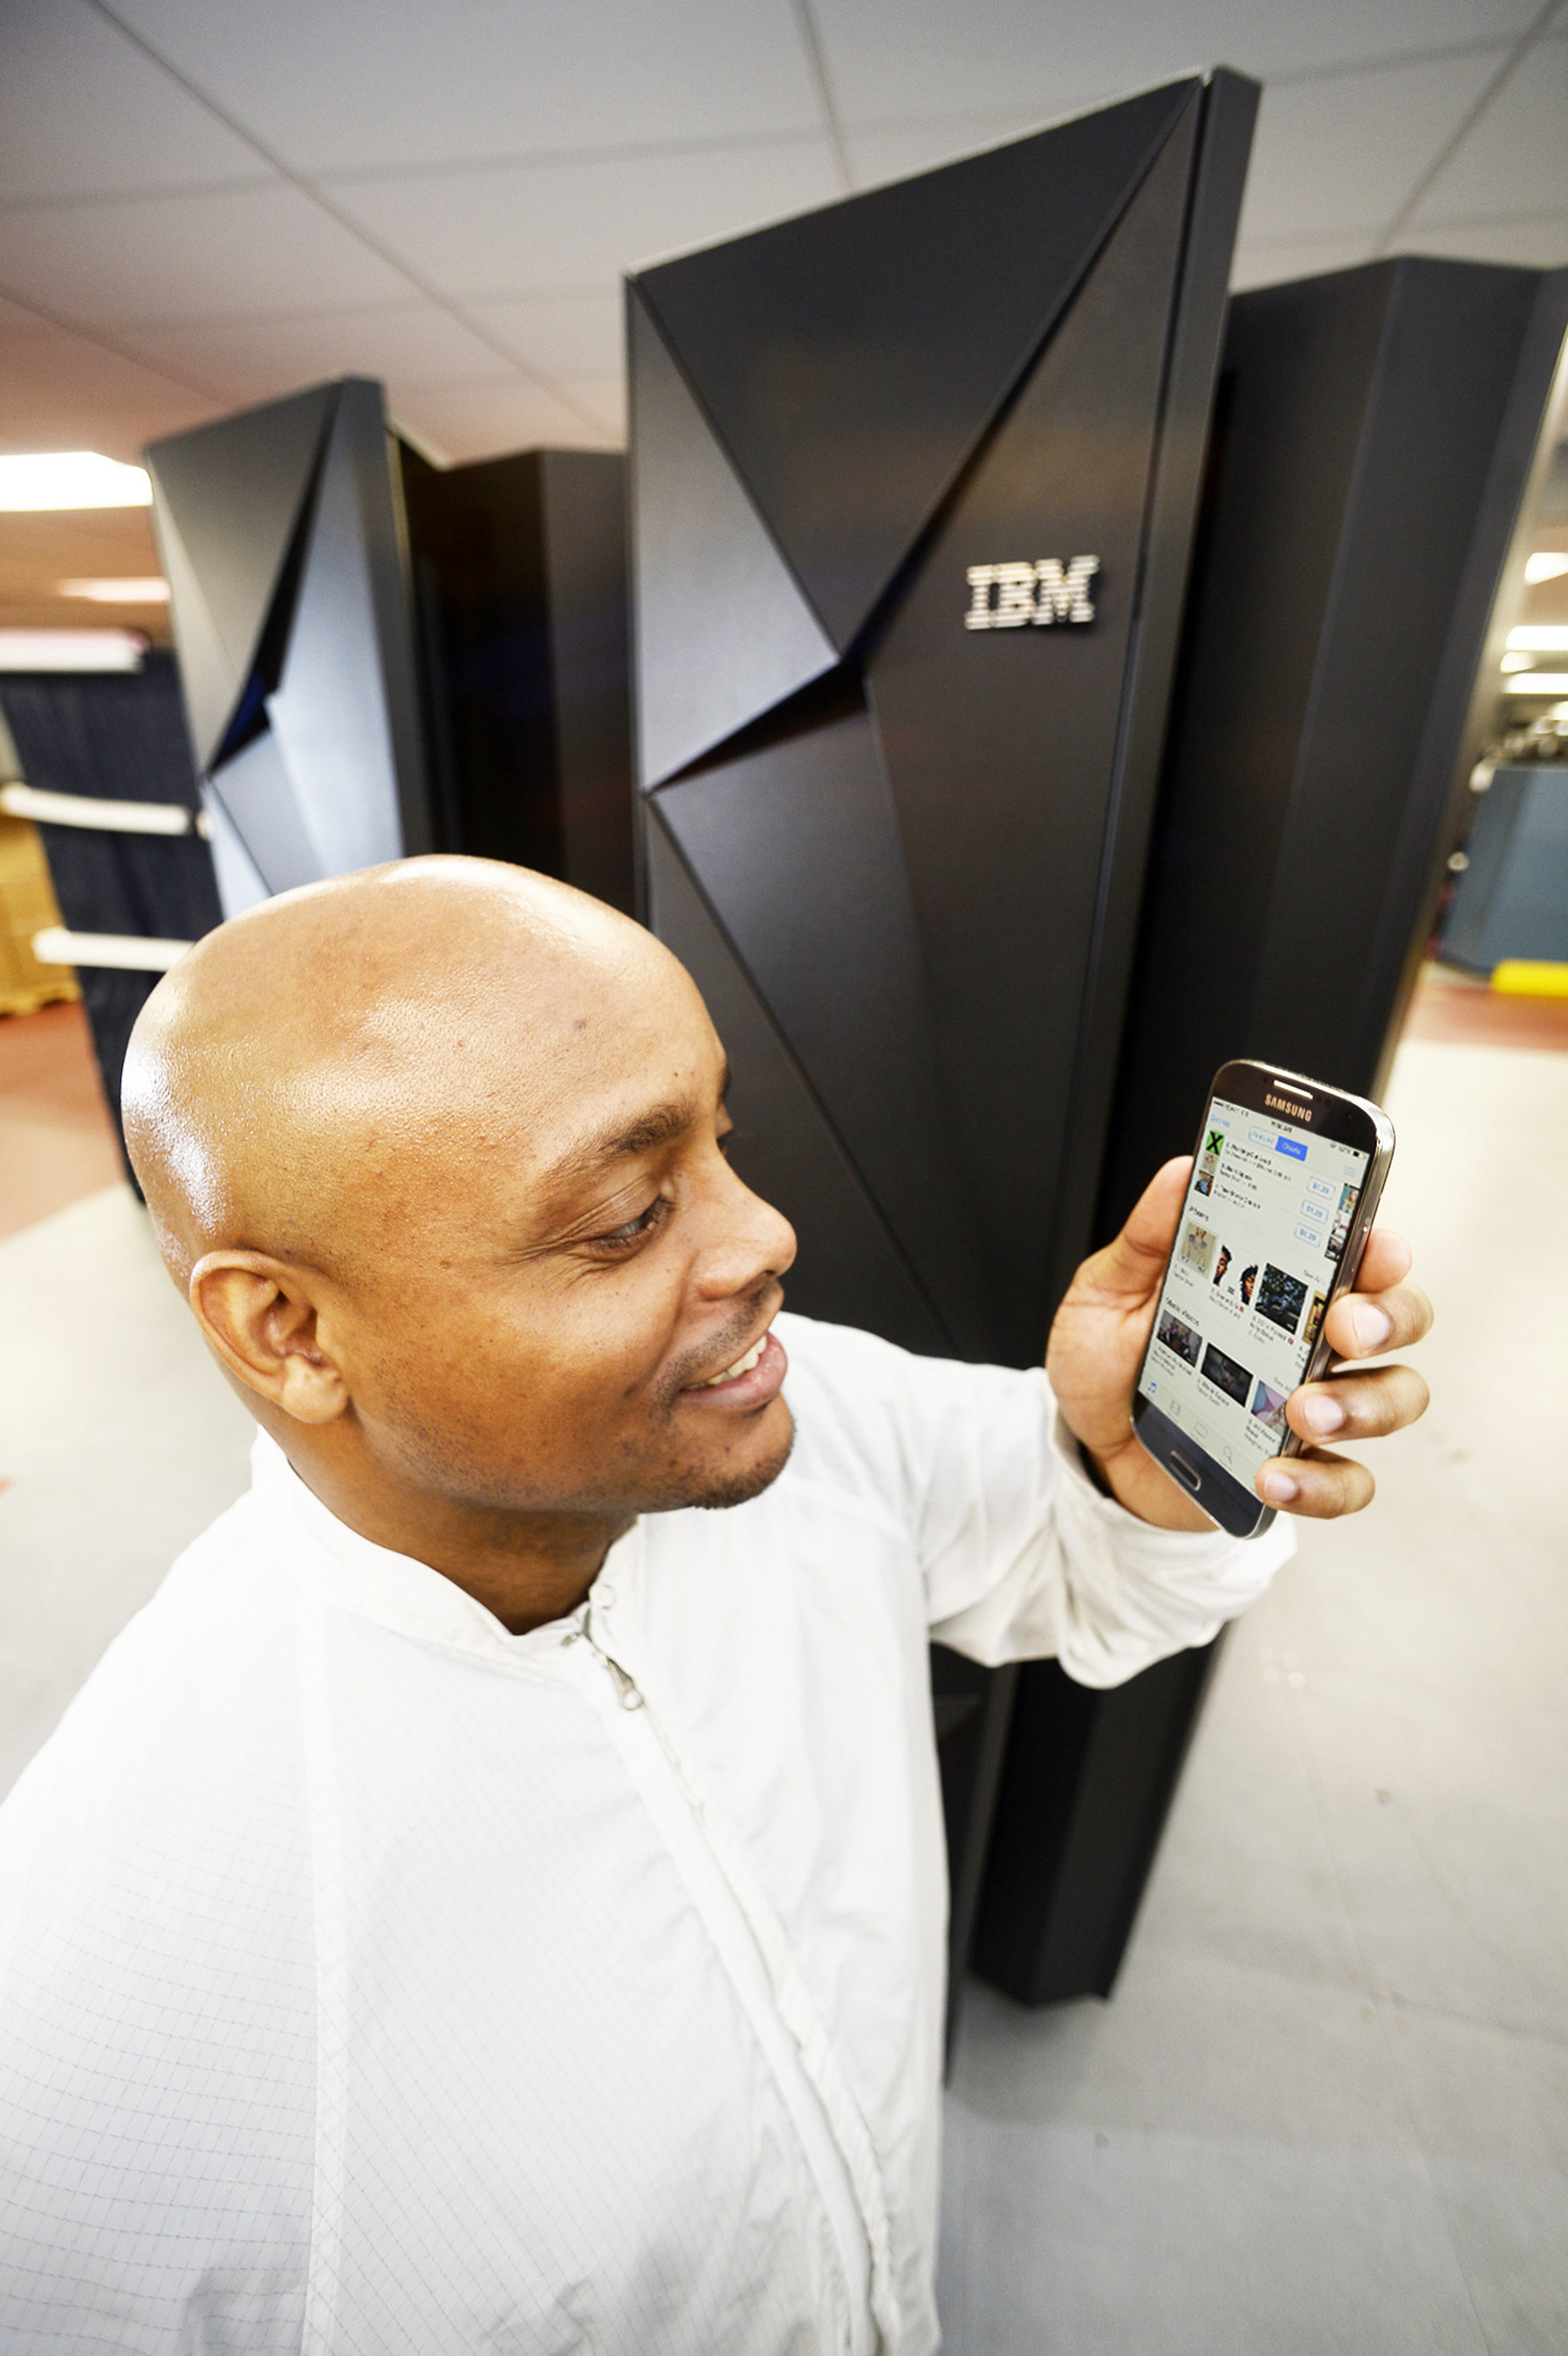 January 14, 2015 - At IBM's manufacturing facility in Poughkeepsie, NY, software developer Moses Vaughan tests a mobile app that is running on IBM's new z13 mainframe, one of the most sophisticated computer systems ever built. It culminates a $1 billion investment, five years of development, and includes more than 500 new patents and represents a collaboration with over 60 clients, underscoring IBM's commitment to providing higher-value, innovative technology for clients. (Jon Simon/Feature Photo Service for IBM)